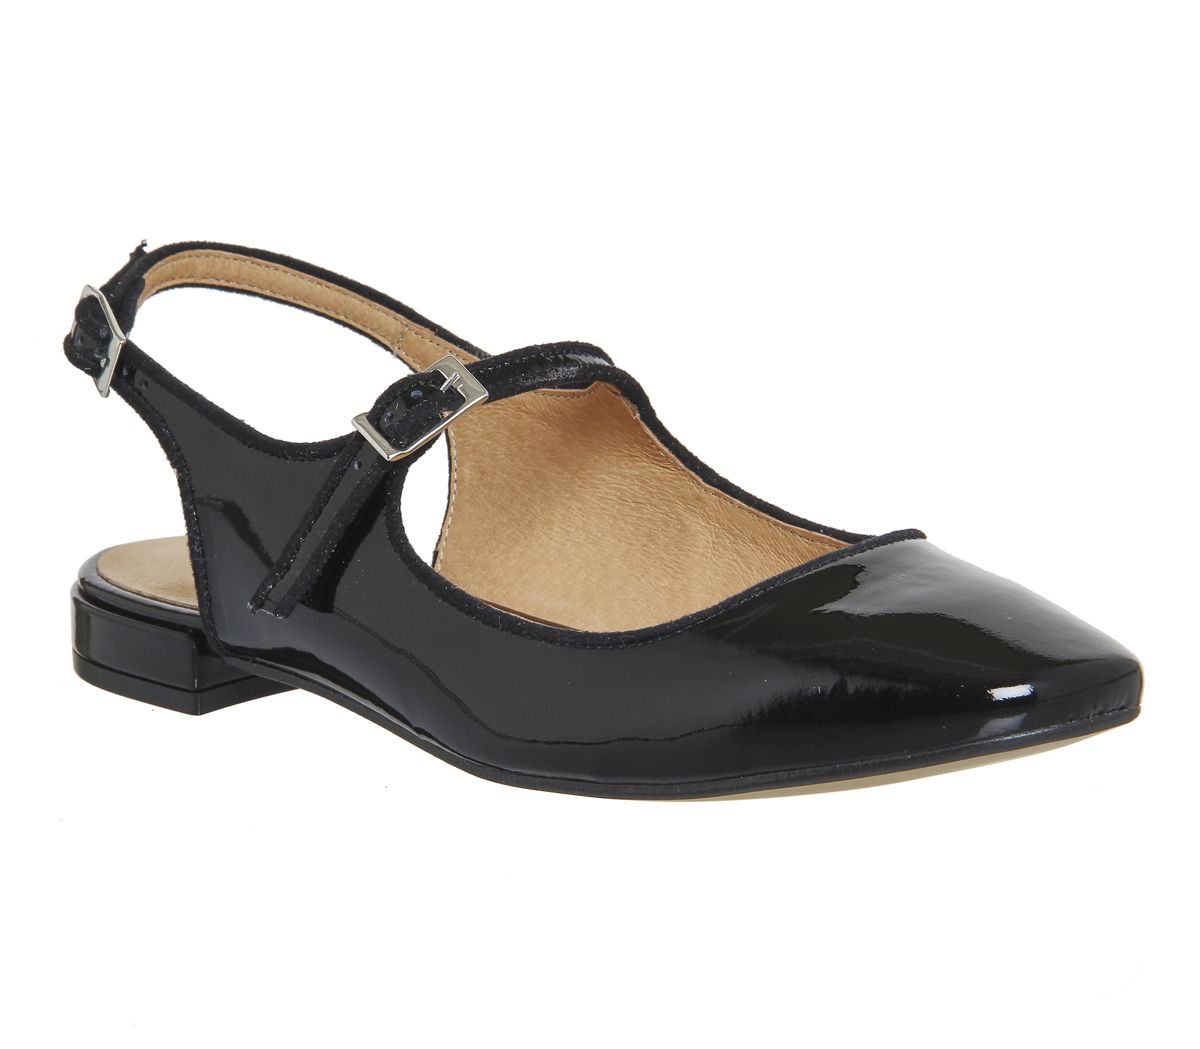 Office Dimples Square Toe Slingback Mary Janes Black Patent Leather - Flats